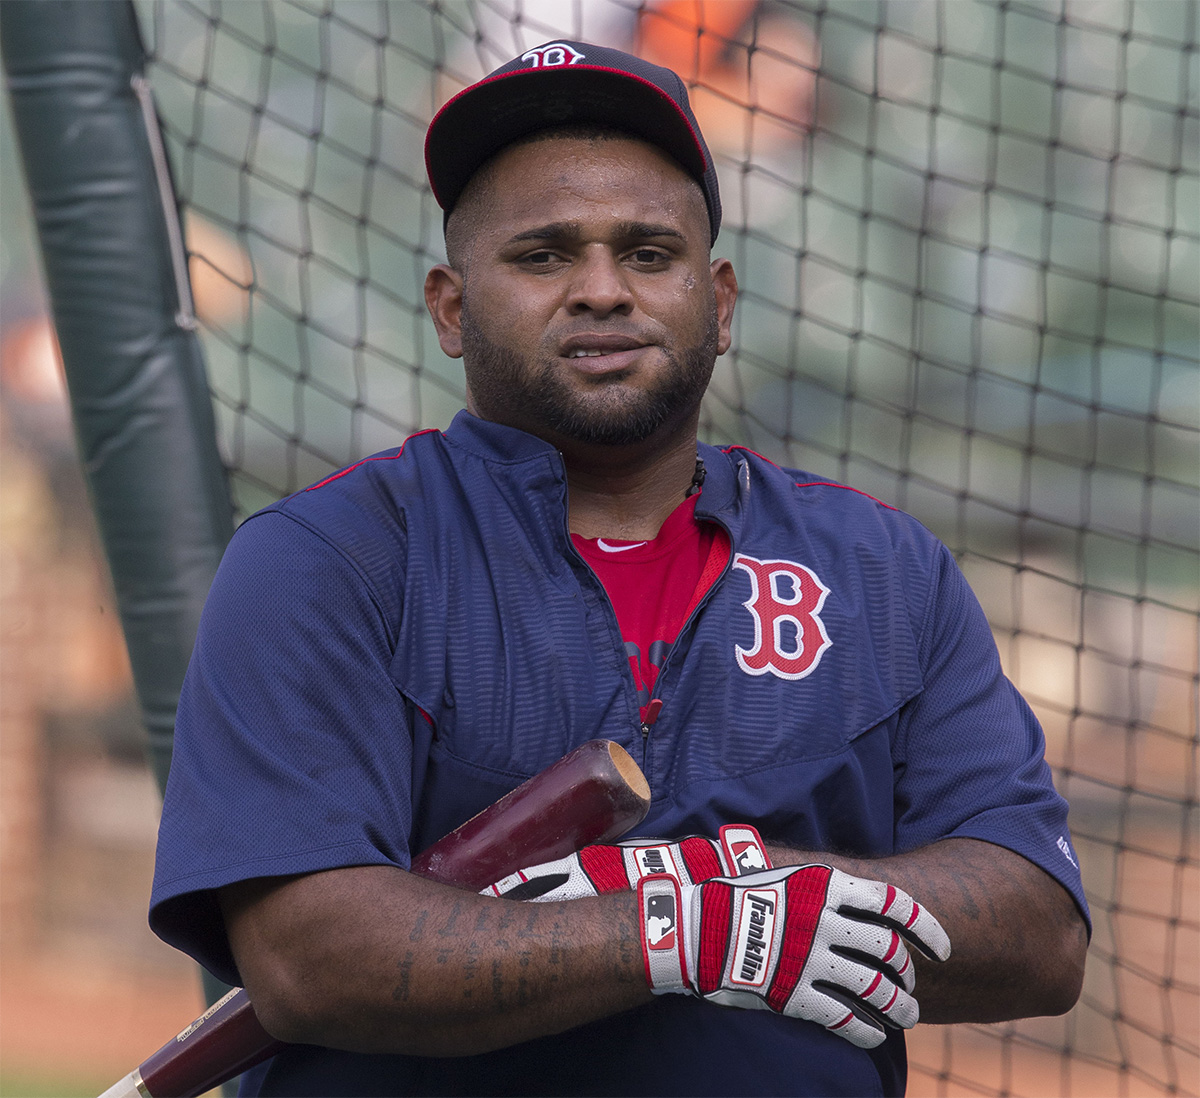 Pablo Sandoval by Keith Allison on Flickr/Creative Commons